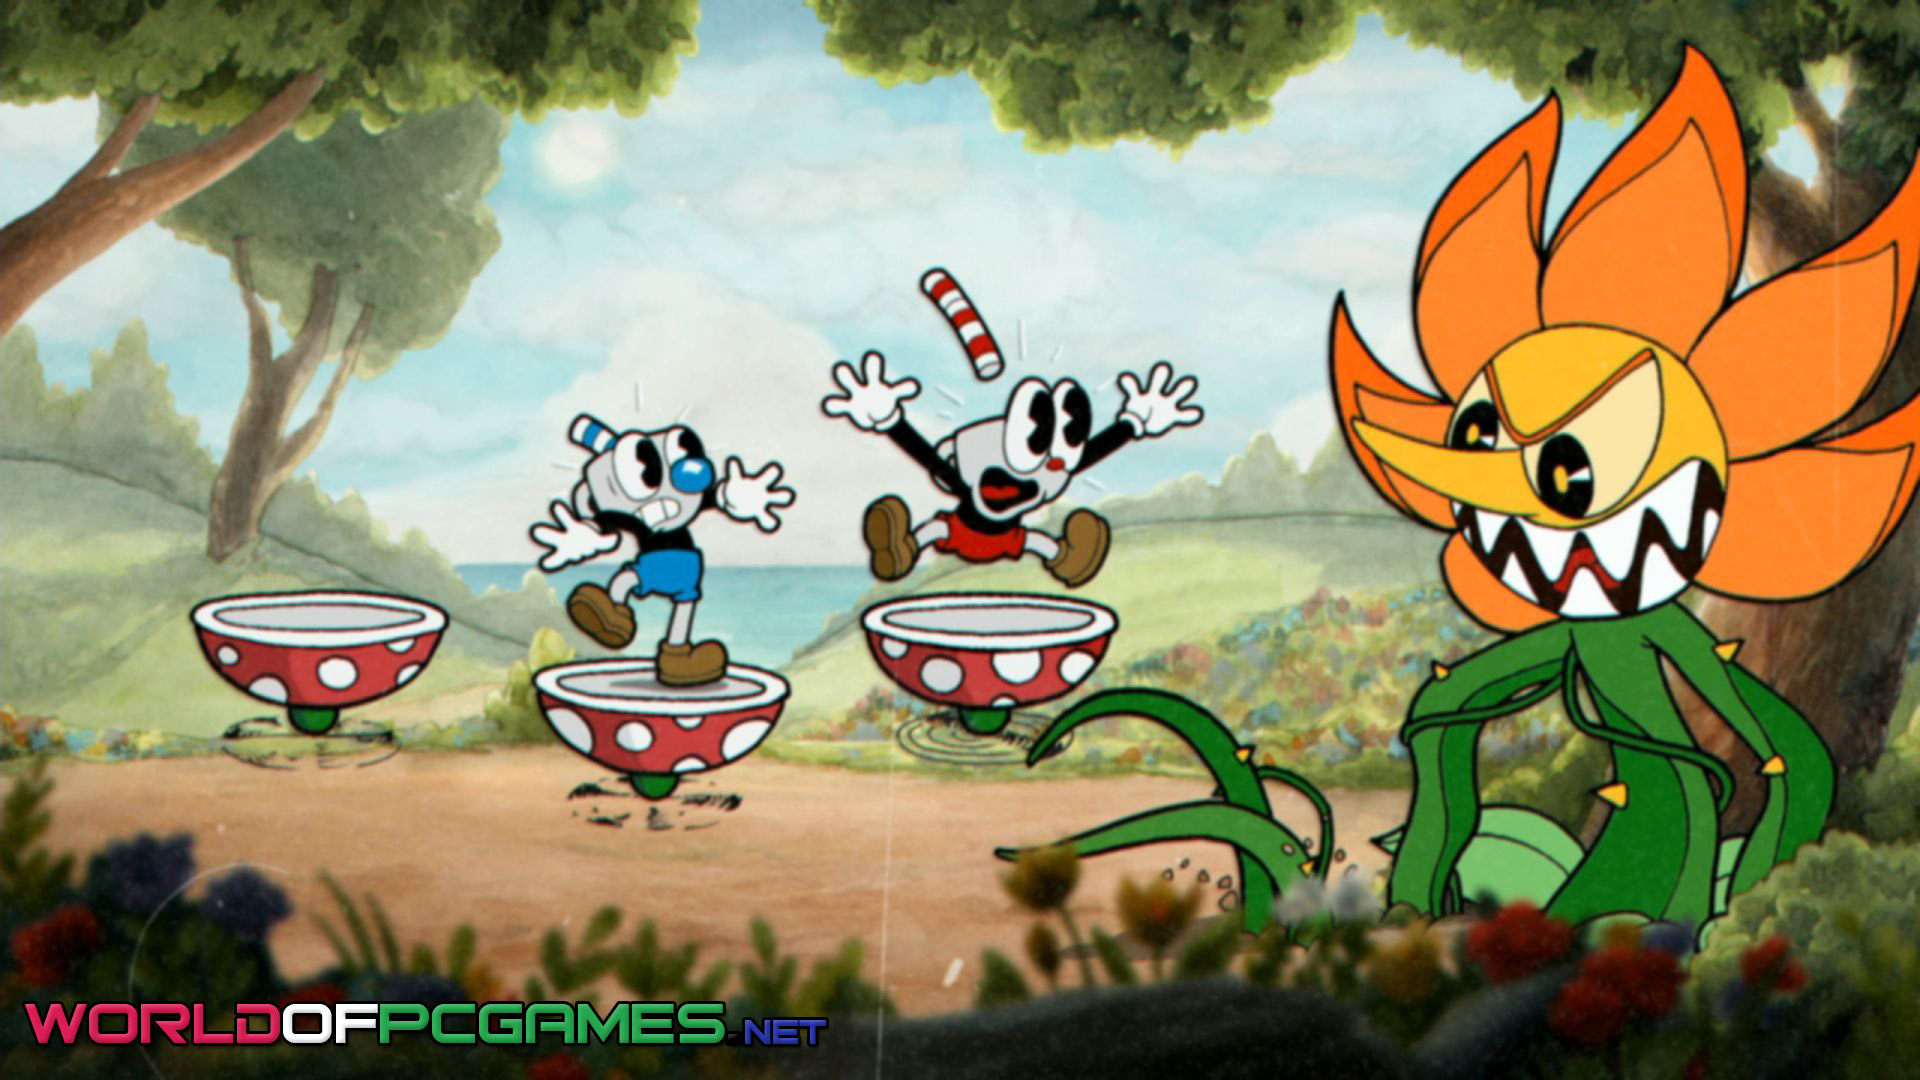 Cuphead For Mac Free Download By worldof-pcgames.net